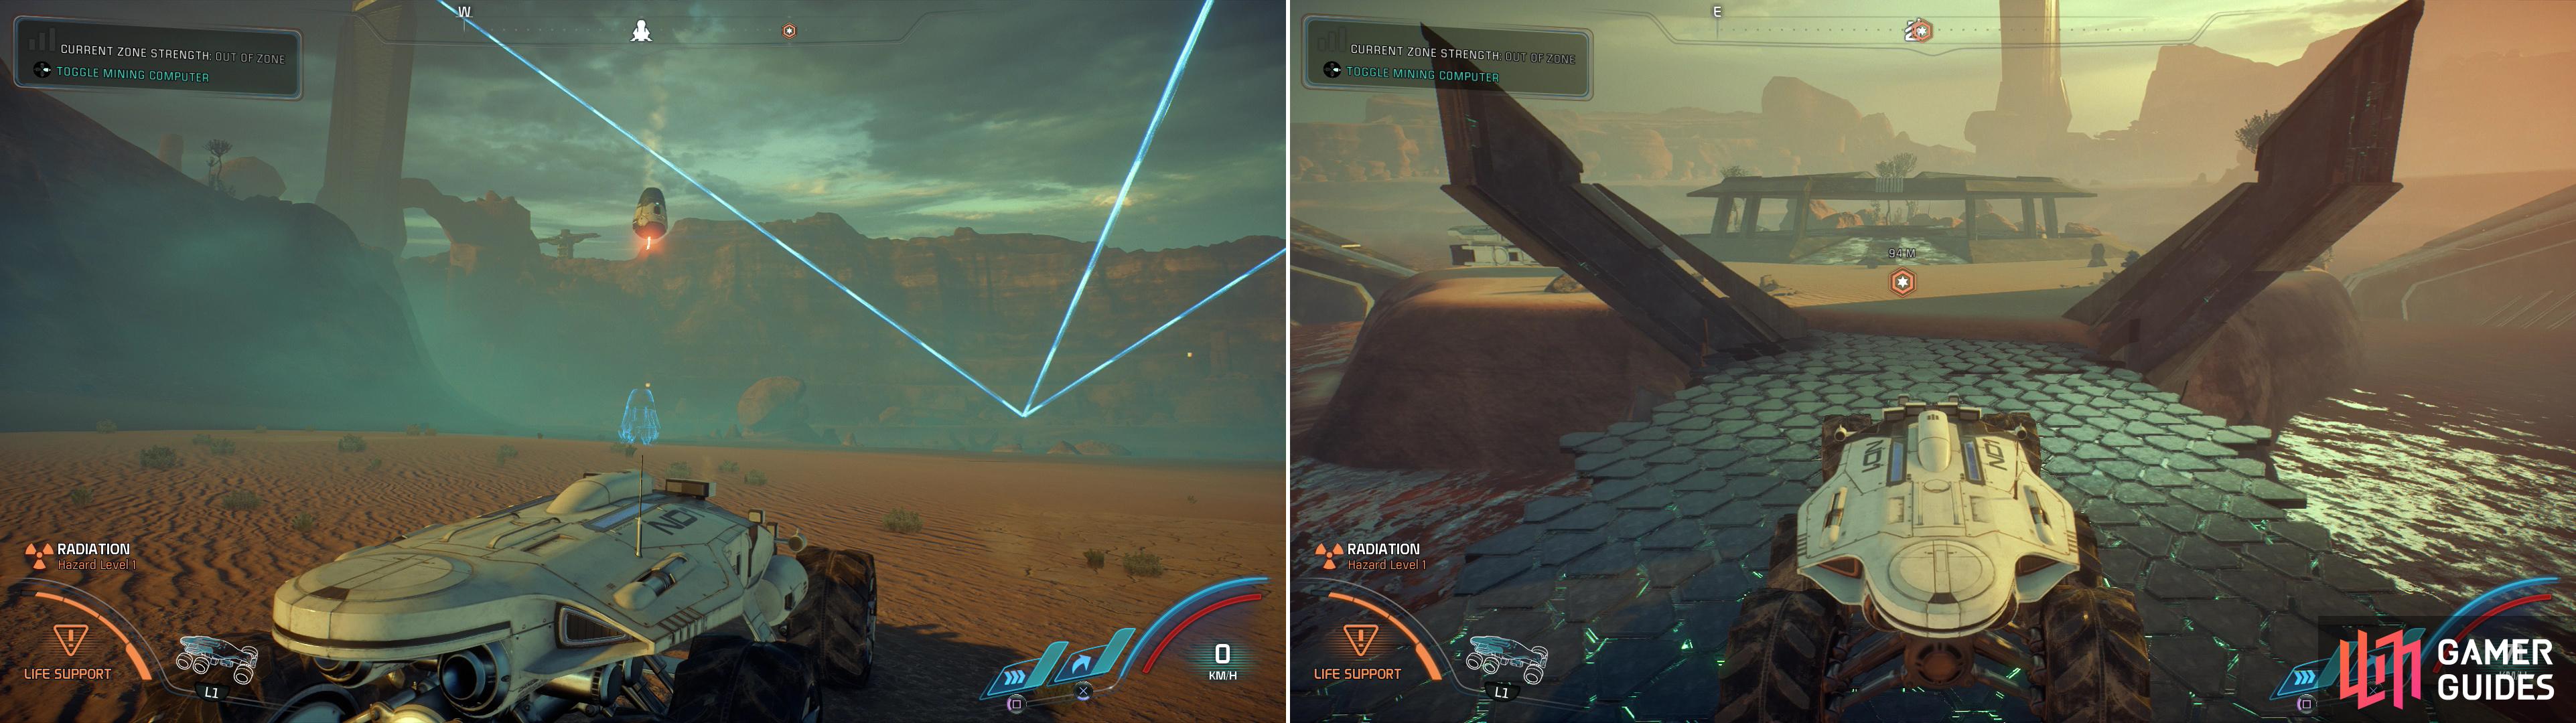 Deploy a Forward Station in The Golden Wastes below the Kett base (left) then drive to where the monoliths indicate the Remnant control center is (right).